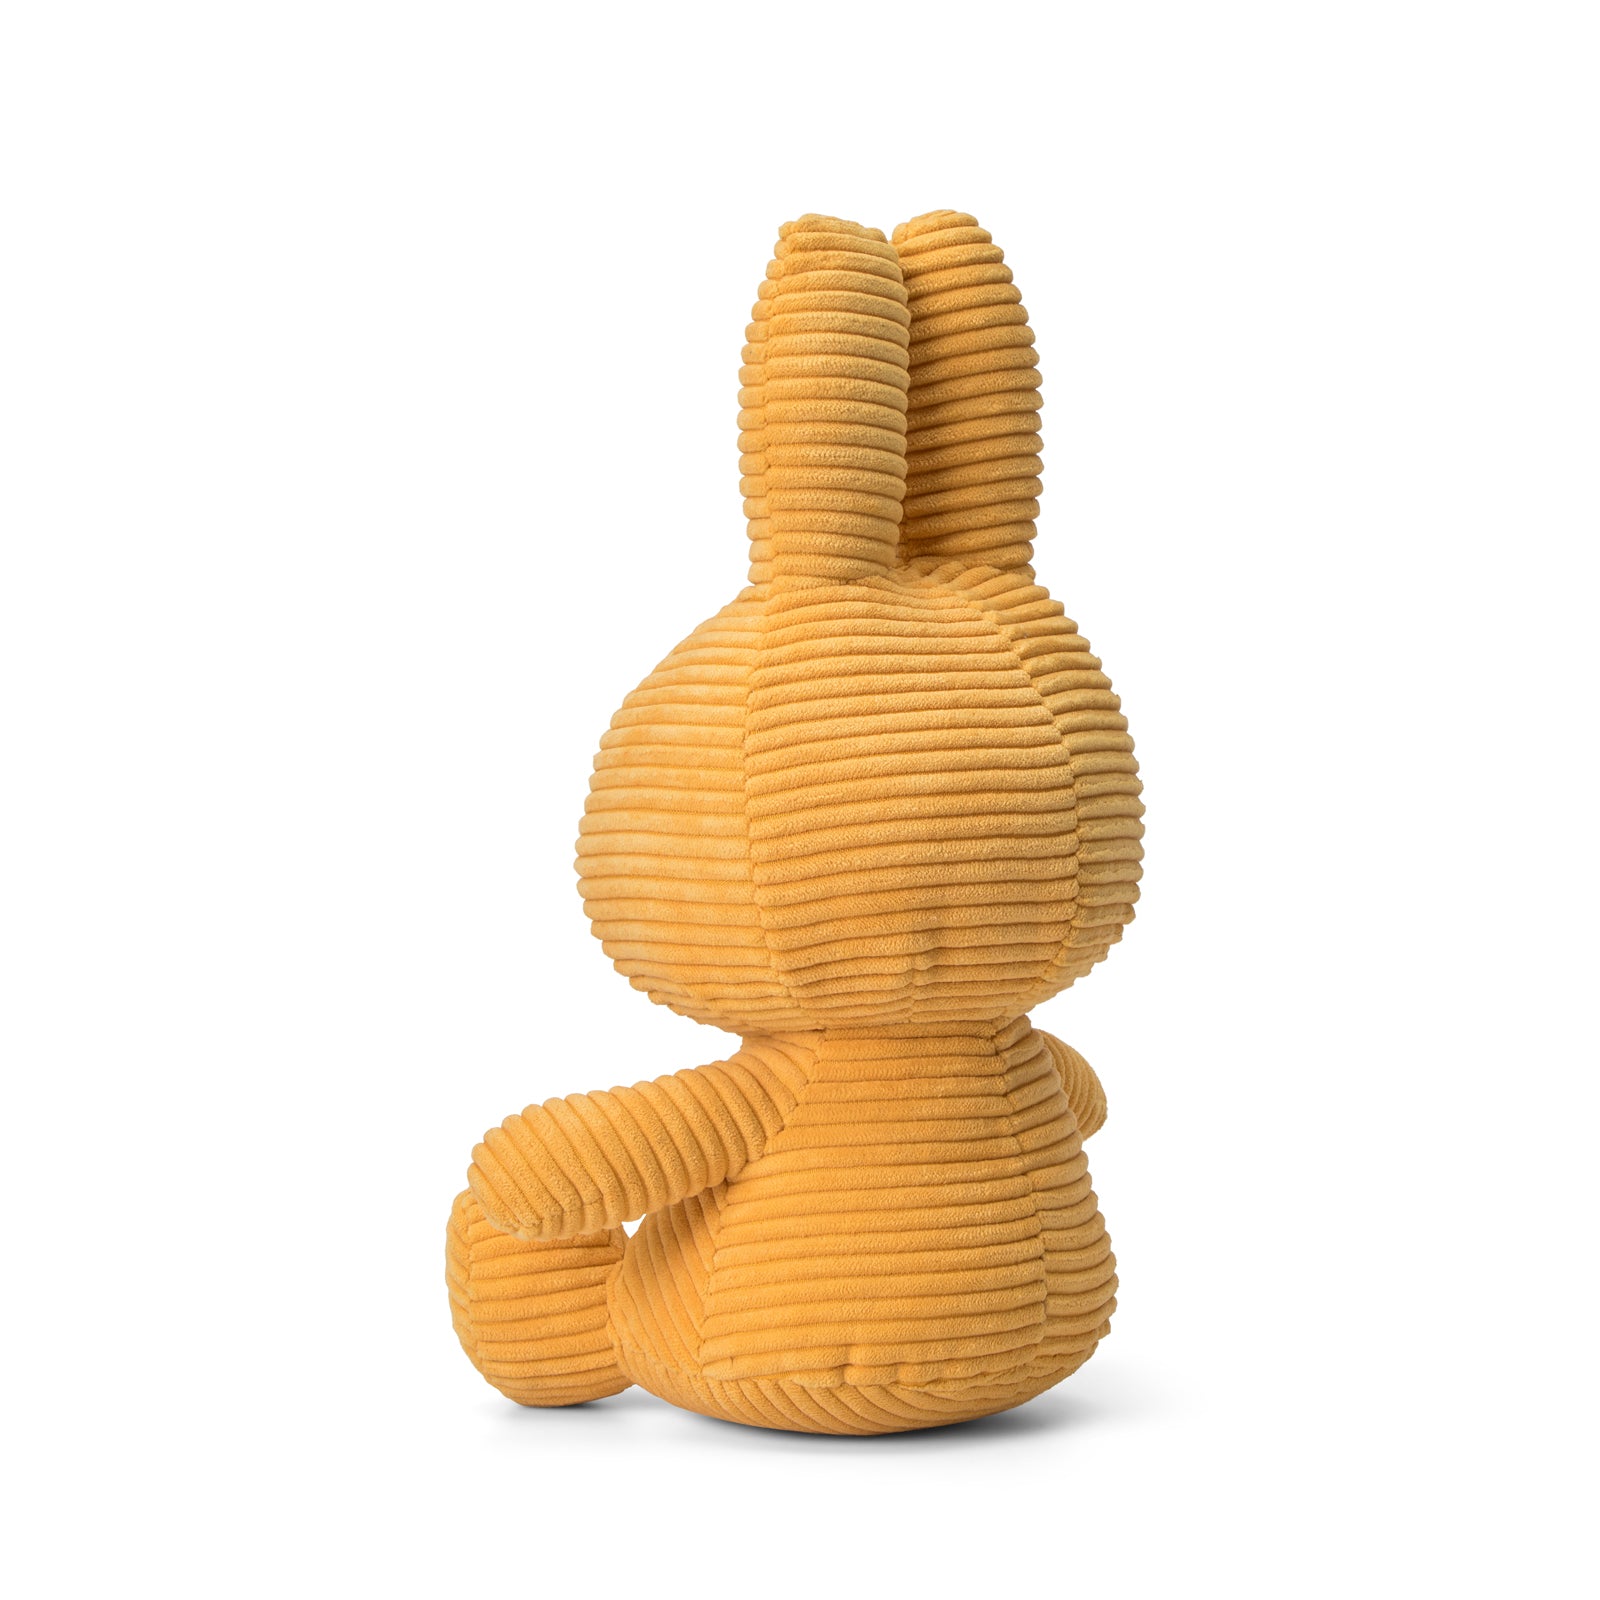 Back quarter view of yellow Miffy the rabbit